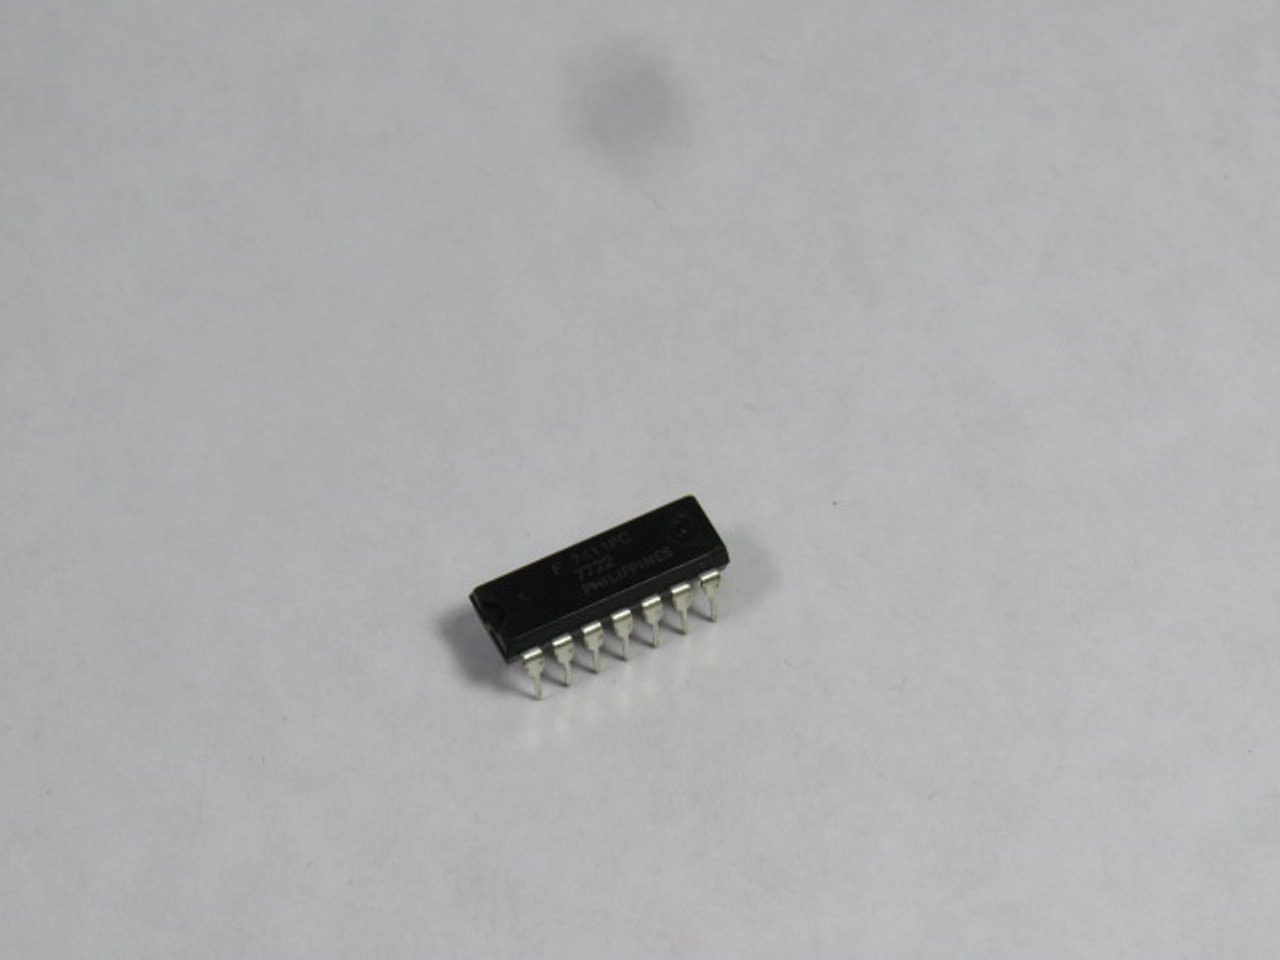 Fairchild 7411PC Semiconductor IC Chip USED